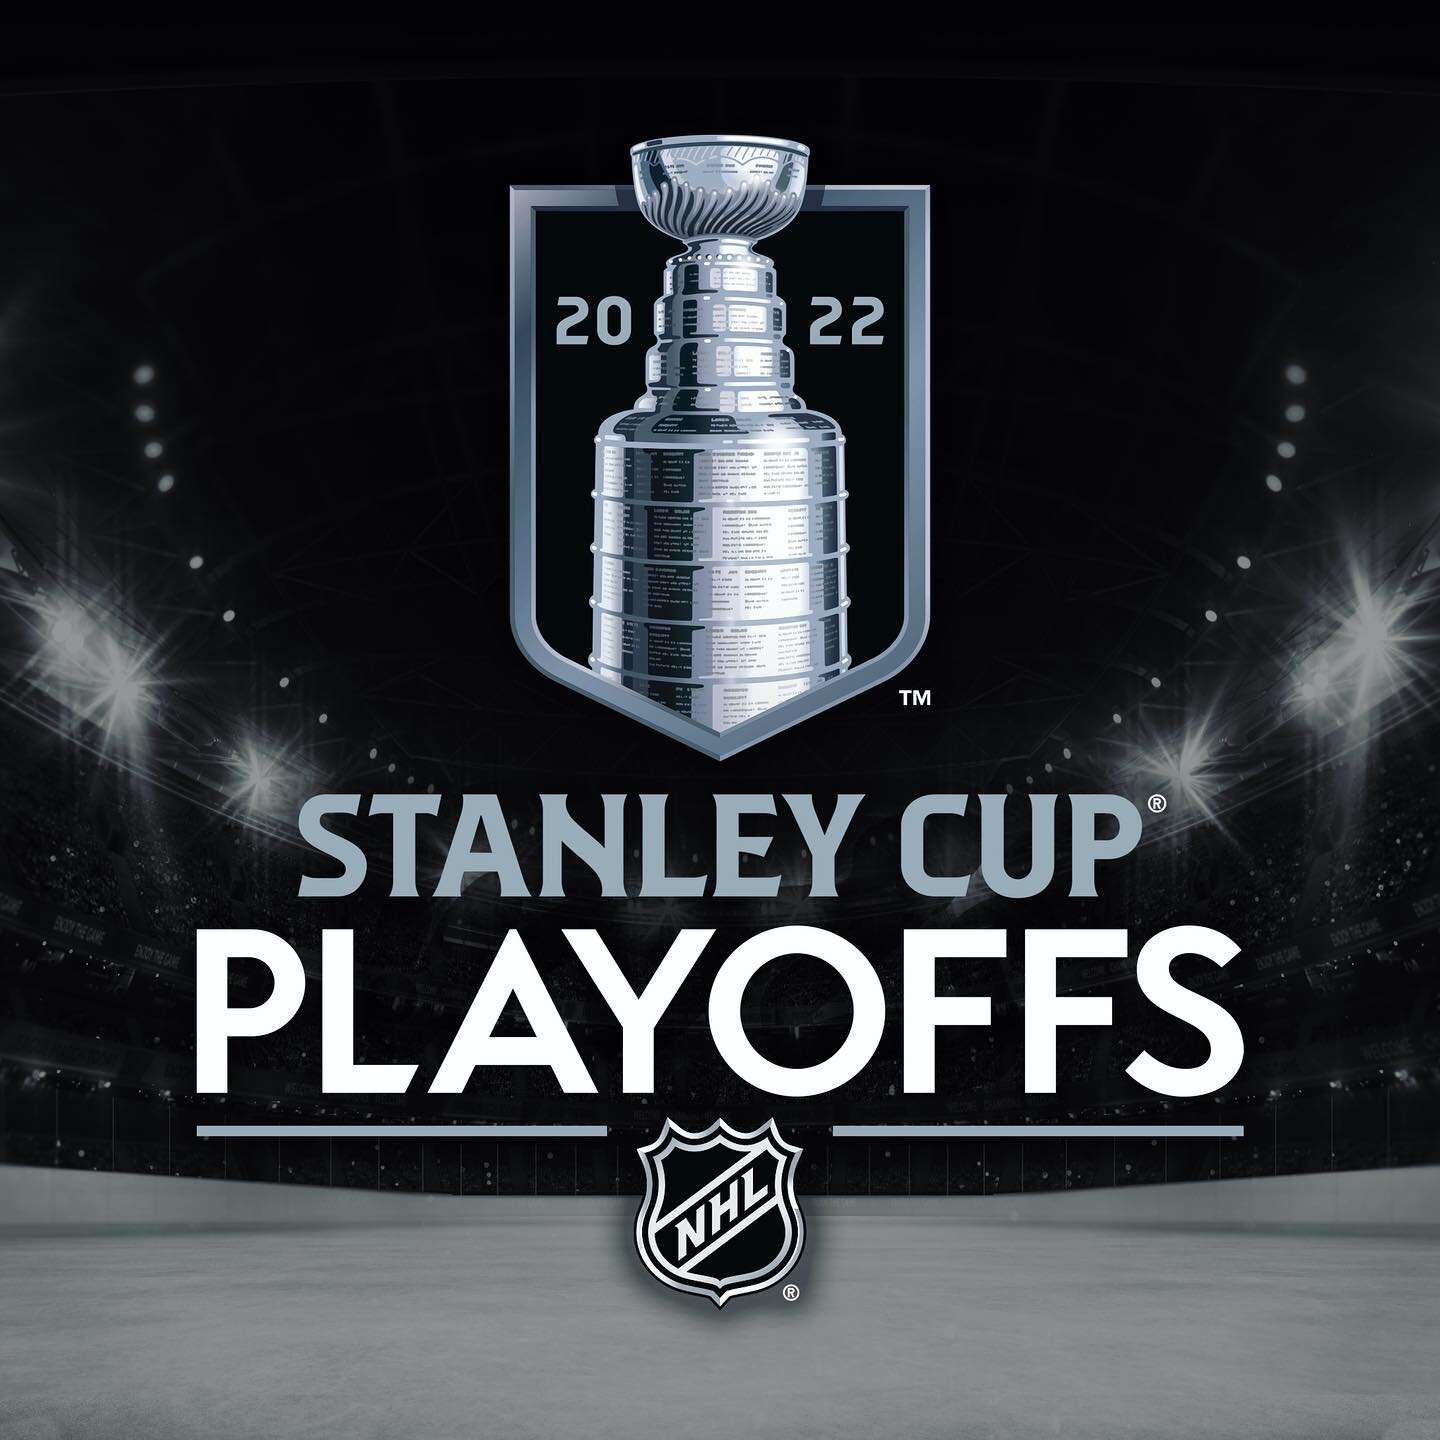 Fanbrandz is honored to have partnered with the @NHL for the rebranding of the Stanley Cup for the next generation!

#nhl #stanleycup #stanleycupplayoffs #sports #sportsdesign #designforsport #hockey #hockeylife #playoffs #designforsports #thestanley